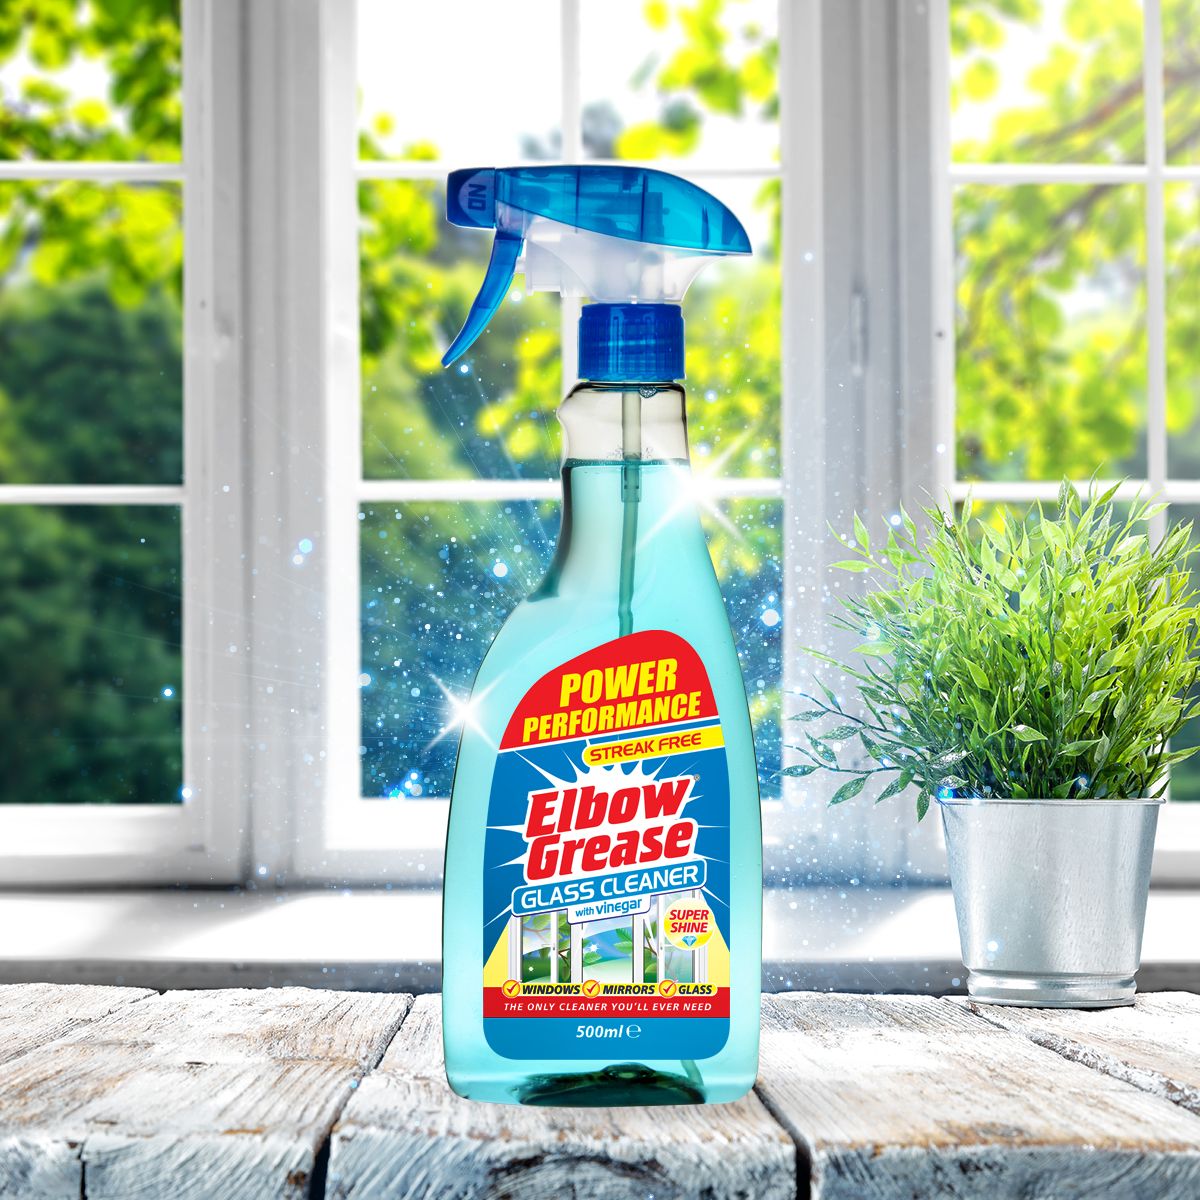 Our glass cleaner will get your windows sparkling in no time. Why settle for less? ✨ ✨ ✨